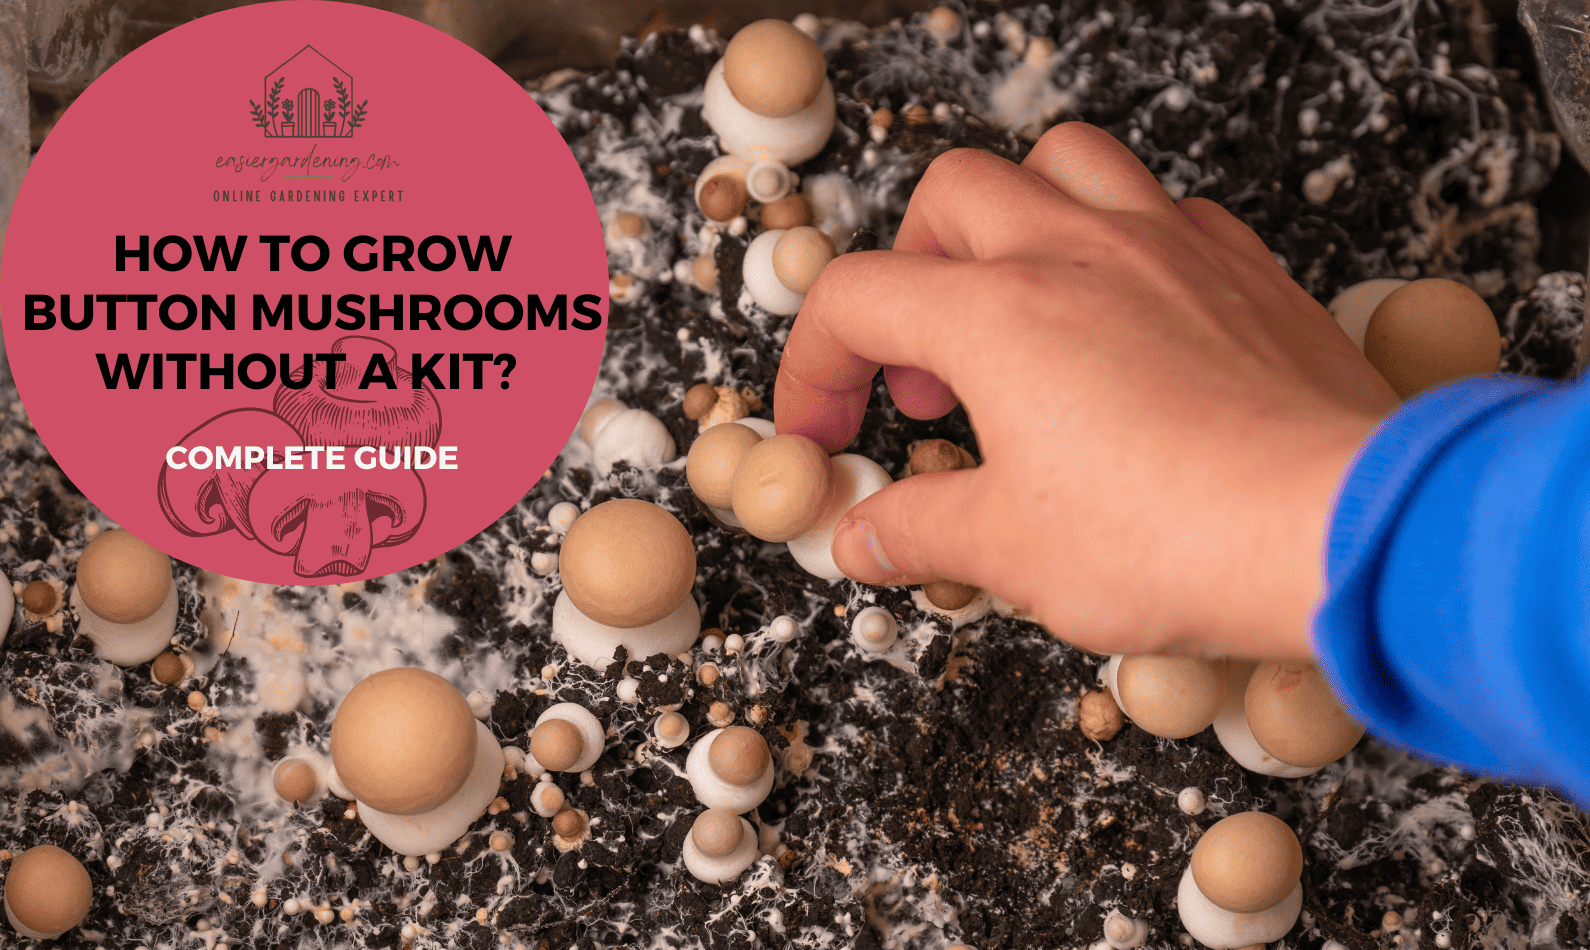 How To Grow Button Mushrooms Without A Kit?